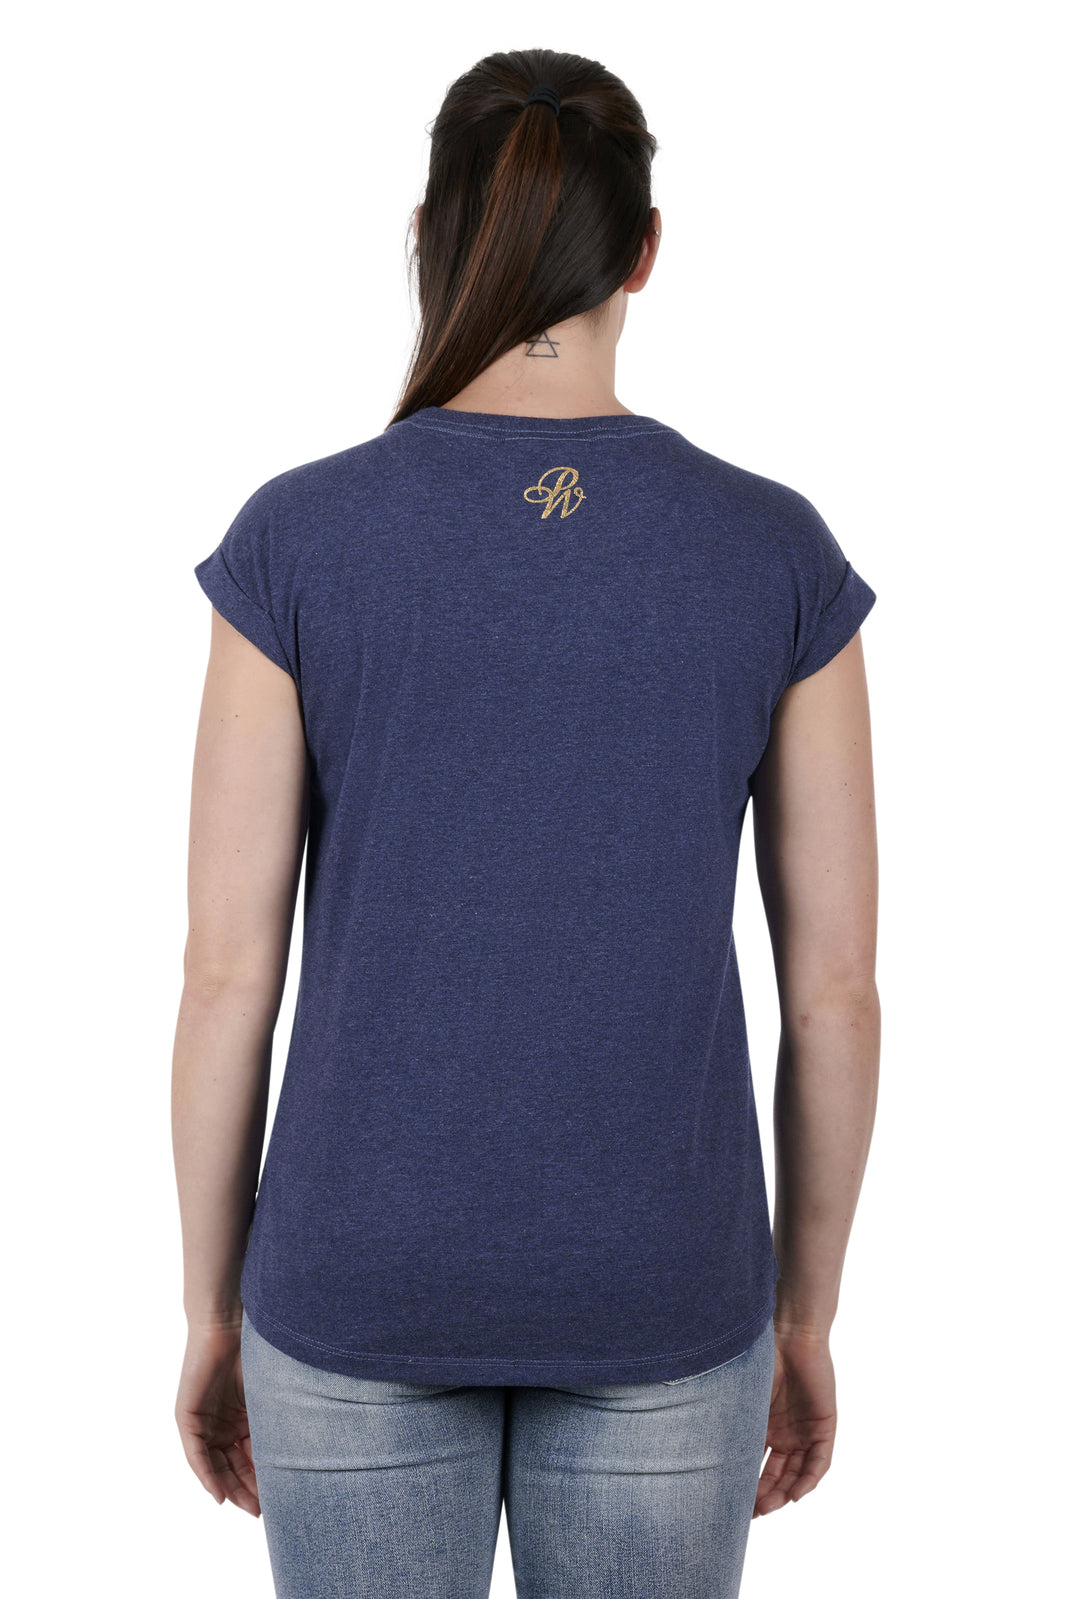 Women's Nia Tank - The Trading Stables